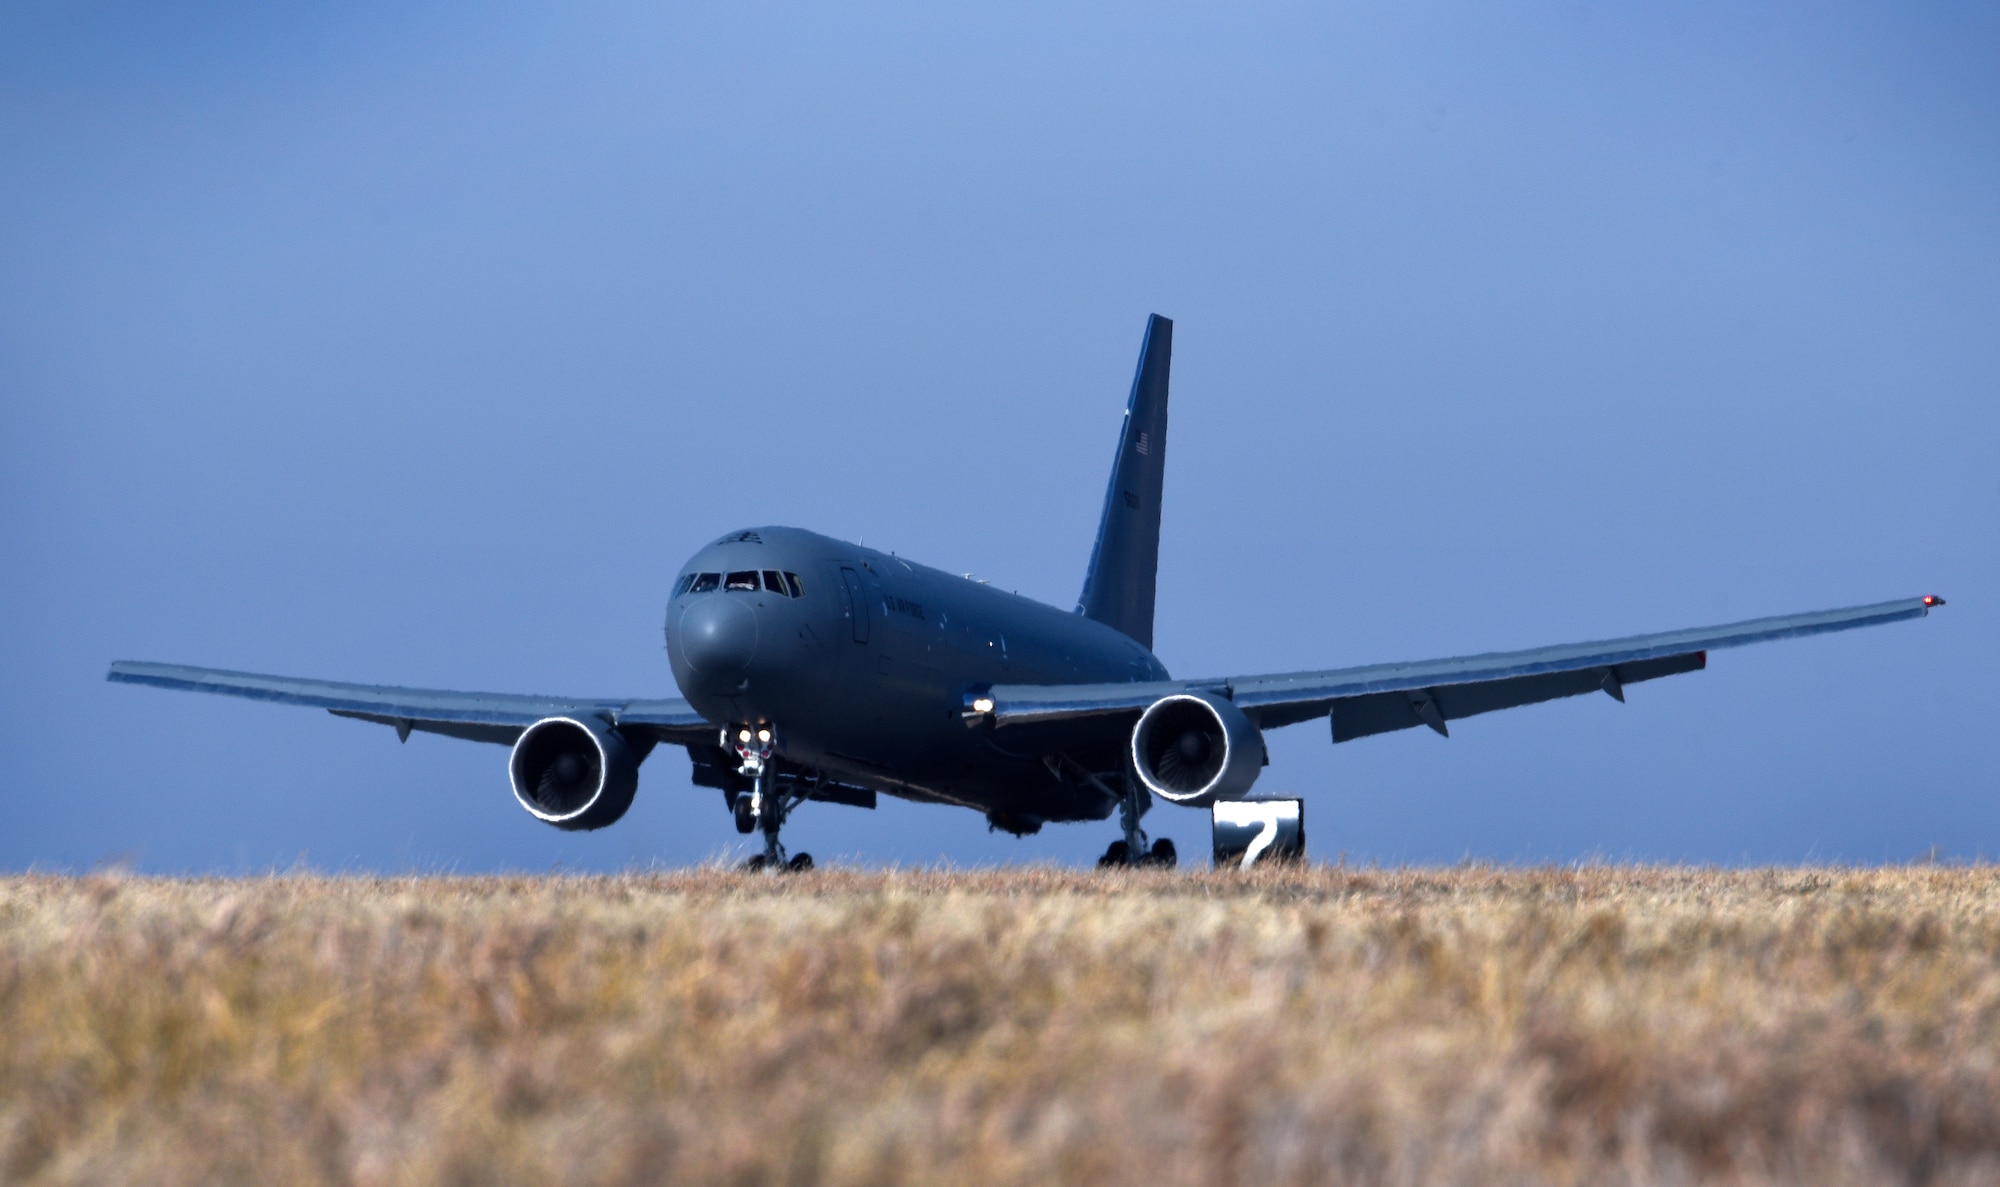 McConnell’s first KC-46A Pegasus lands on the flightline Jan. 25, 2019, at McConnell Air Force Base, Kansas. The KC-46 will serve alongside the KC-135 Stratotanker at McConnell and supply critical aerial refueling, airlift and aeromedical evacuations at a moment’s notice for America’s military and allies. (U.S. Air Force photo by Airman 1st Class Michaela R. Slanchik)